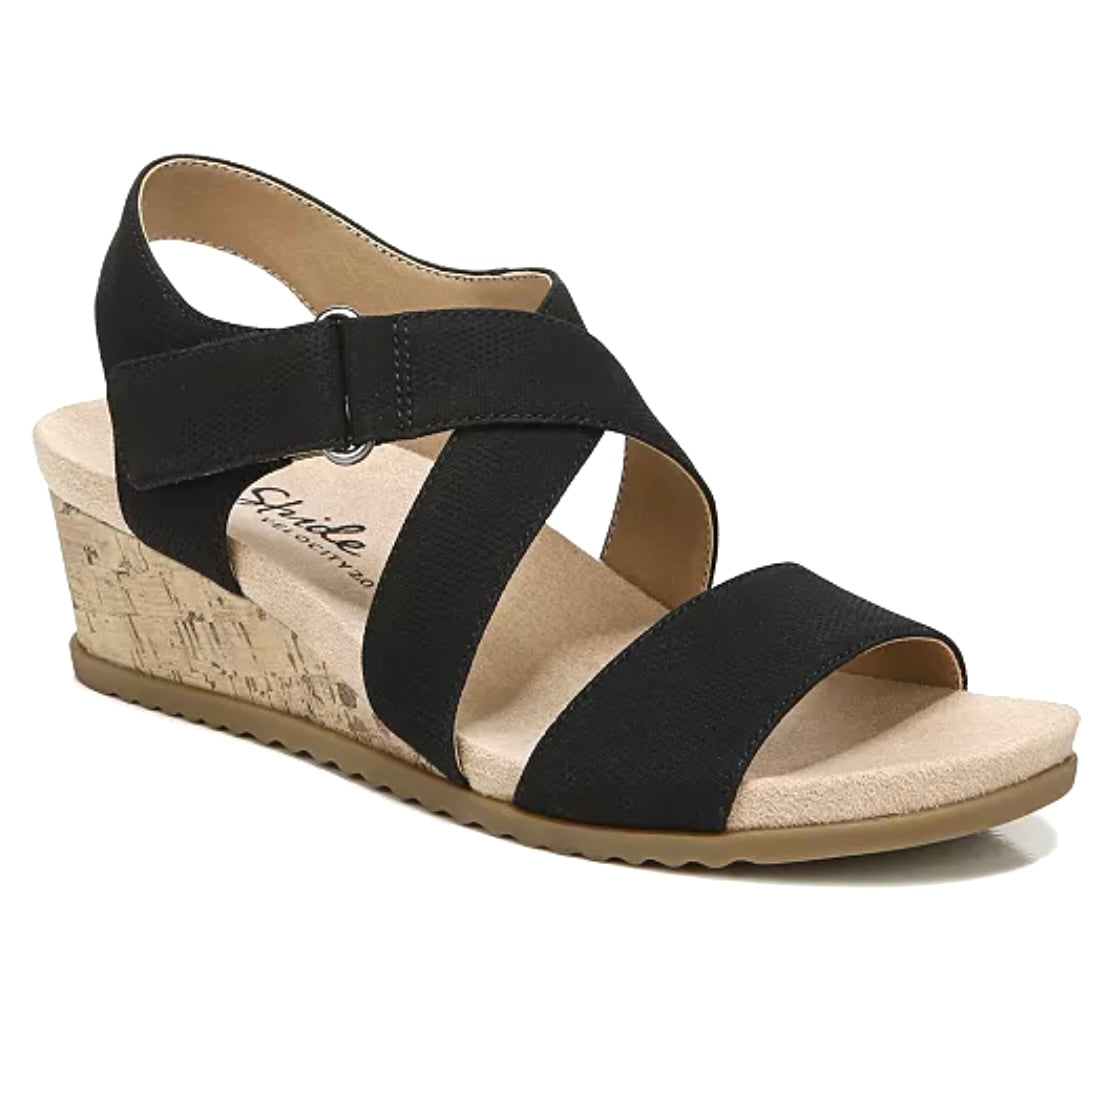 SINCERE Strappy Wedge Sandals Comfort Women's Shoes